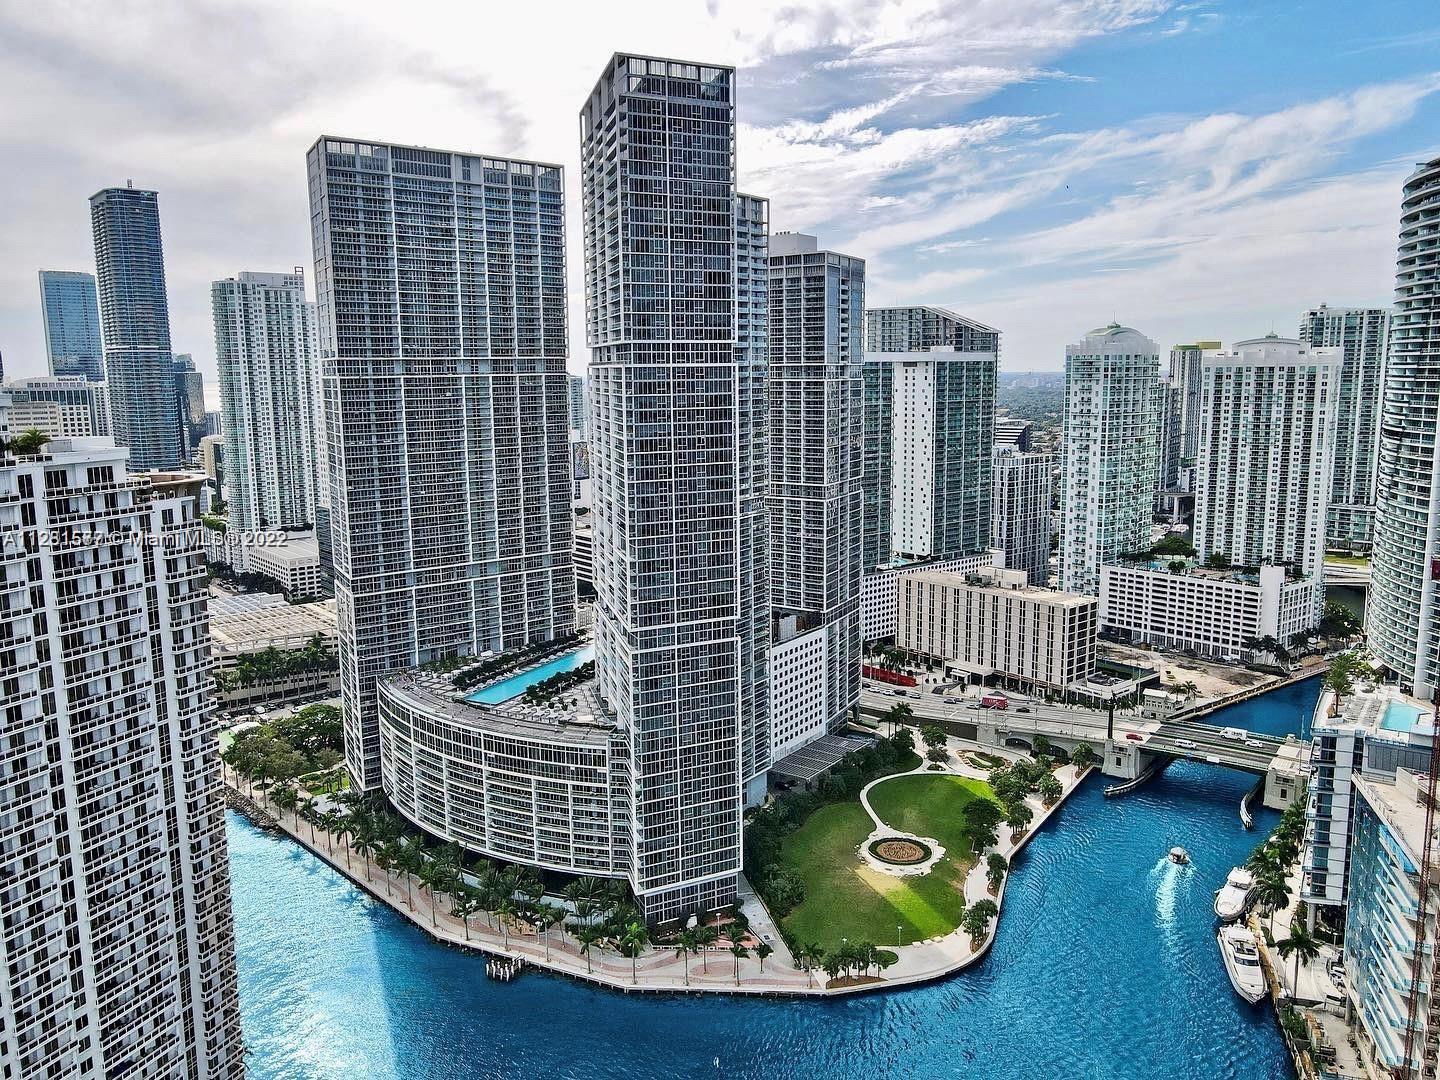 "One of a kind opportunity to own the only Penthouse Apartment available at Icon Brickell III, the most sought-after building in Brickell for investors, as it offers a prime waterfront location and the ability to maximize rental through short-term rentals (Airbnb). Enjoy the perks of Penthouse living, including views of Biscayne Bay to South Beach and the Atlantic Ocean, and sunset views to die for.Newly renovated and it shows, featuring calacatta floors and countertops in the Bath and Kitchen, floor-to-ceiling glass throughout water views from nearly every room, and never rented since being renovated. Amenities abound, including a 300,000 gallon rooftop pool overlooking the Bay, five-star spa, waterfront gym, restaurantssite,and vale"